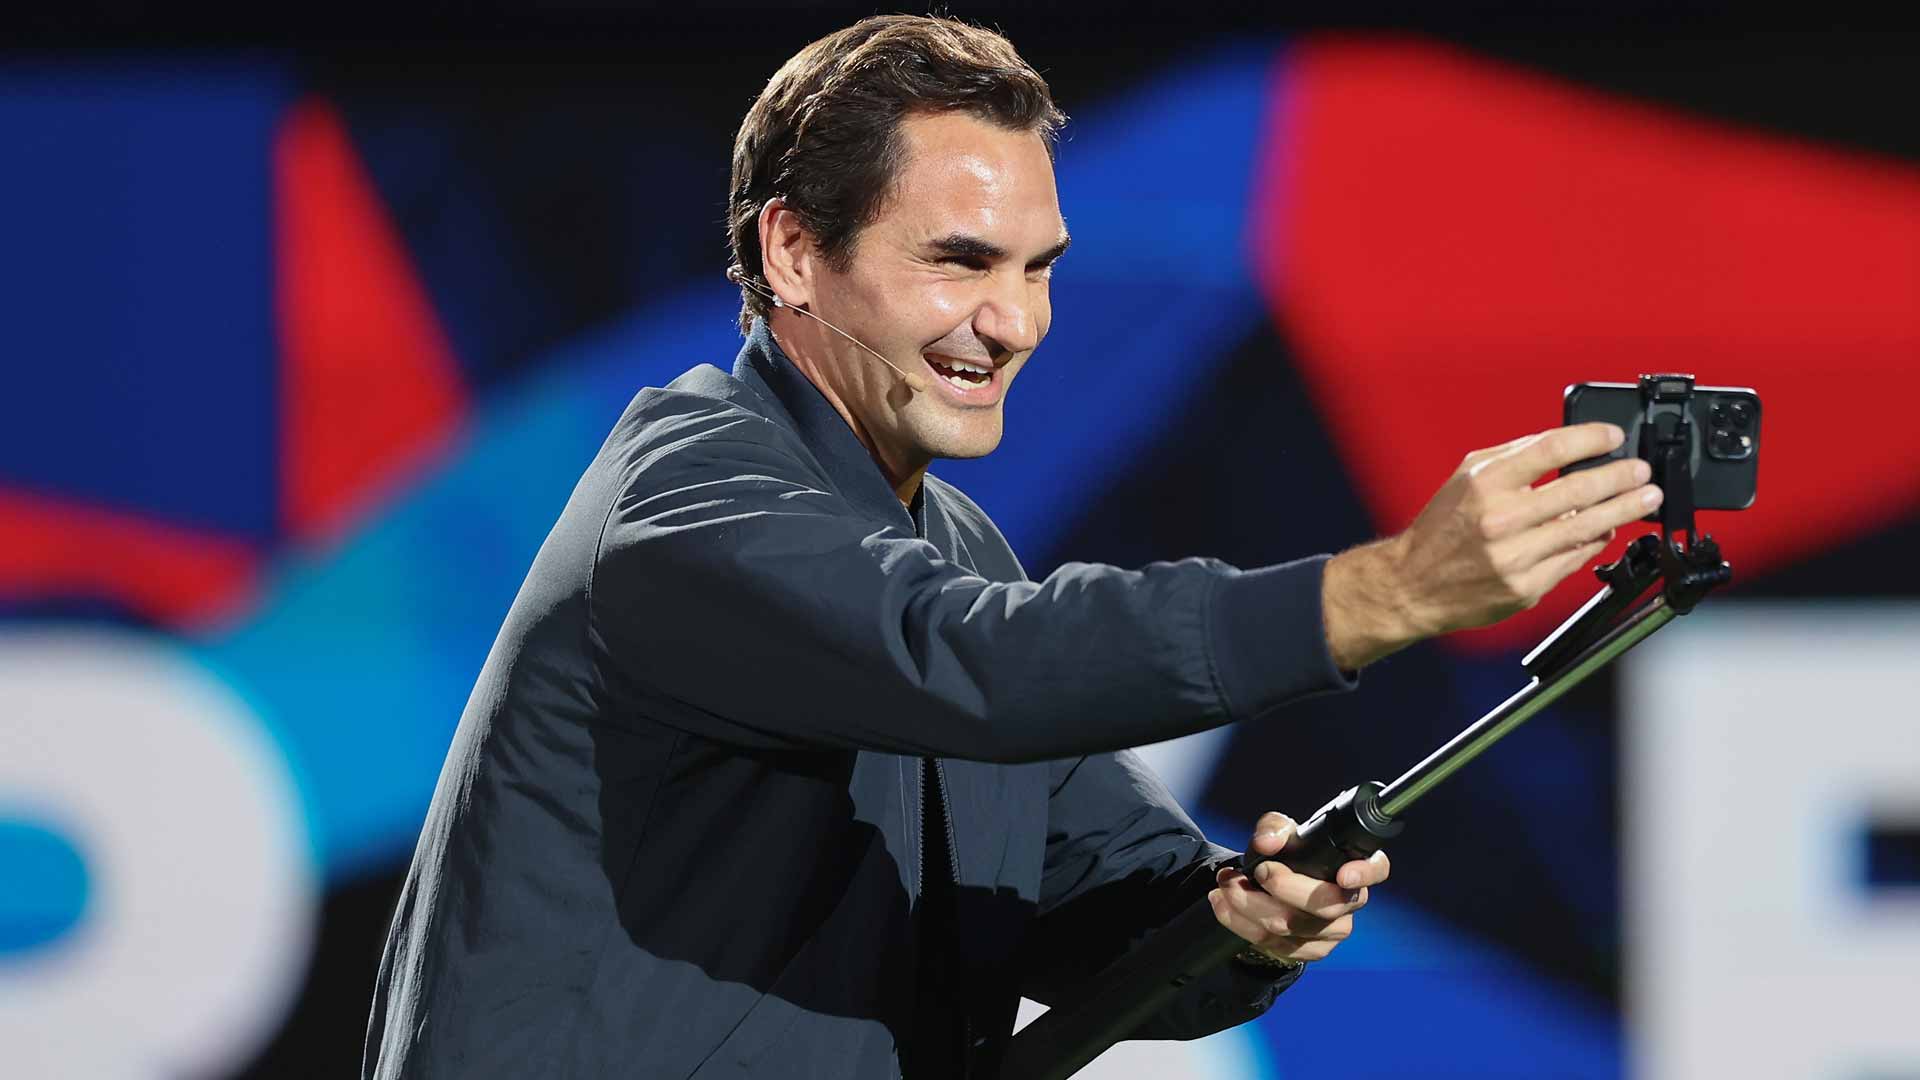 Roger Federer is honoured at the Rolex Shanghai Masters.